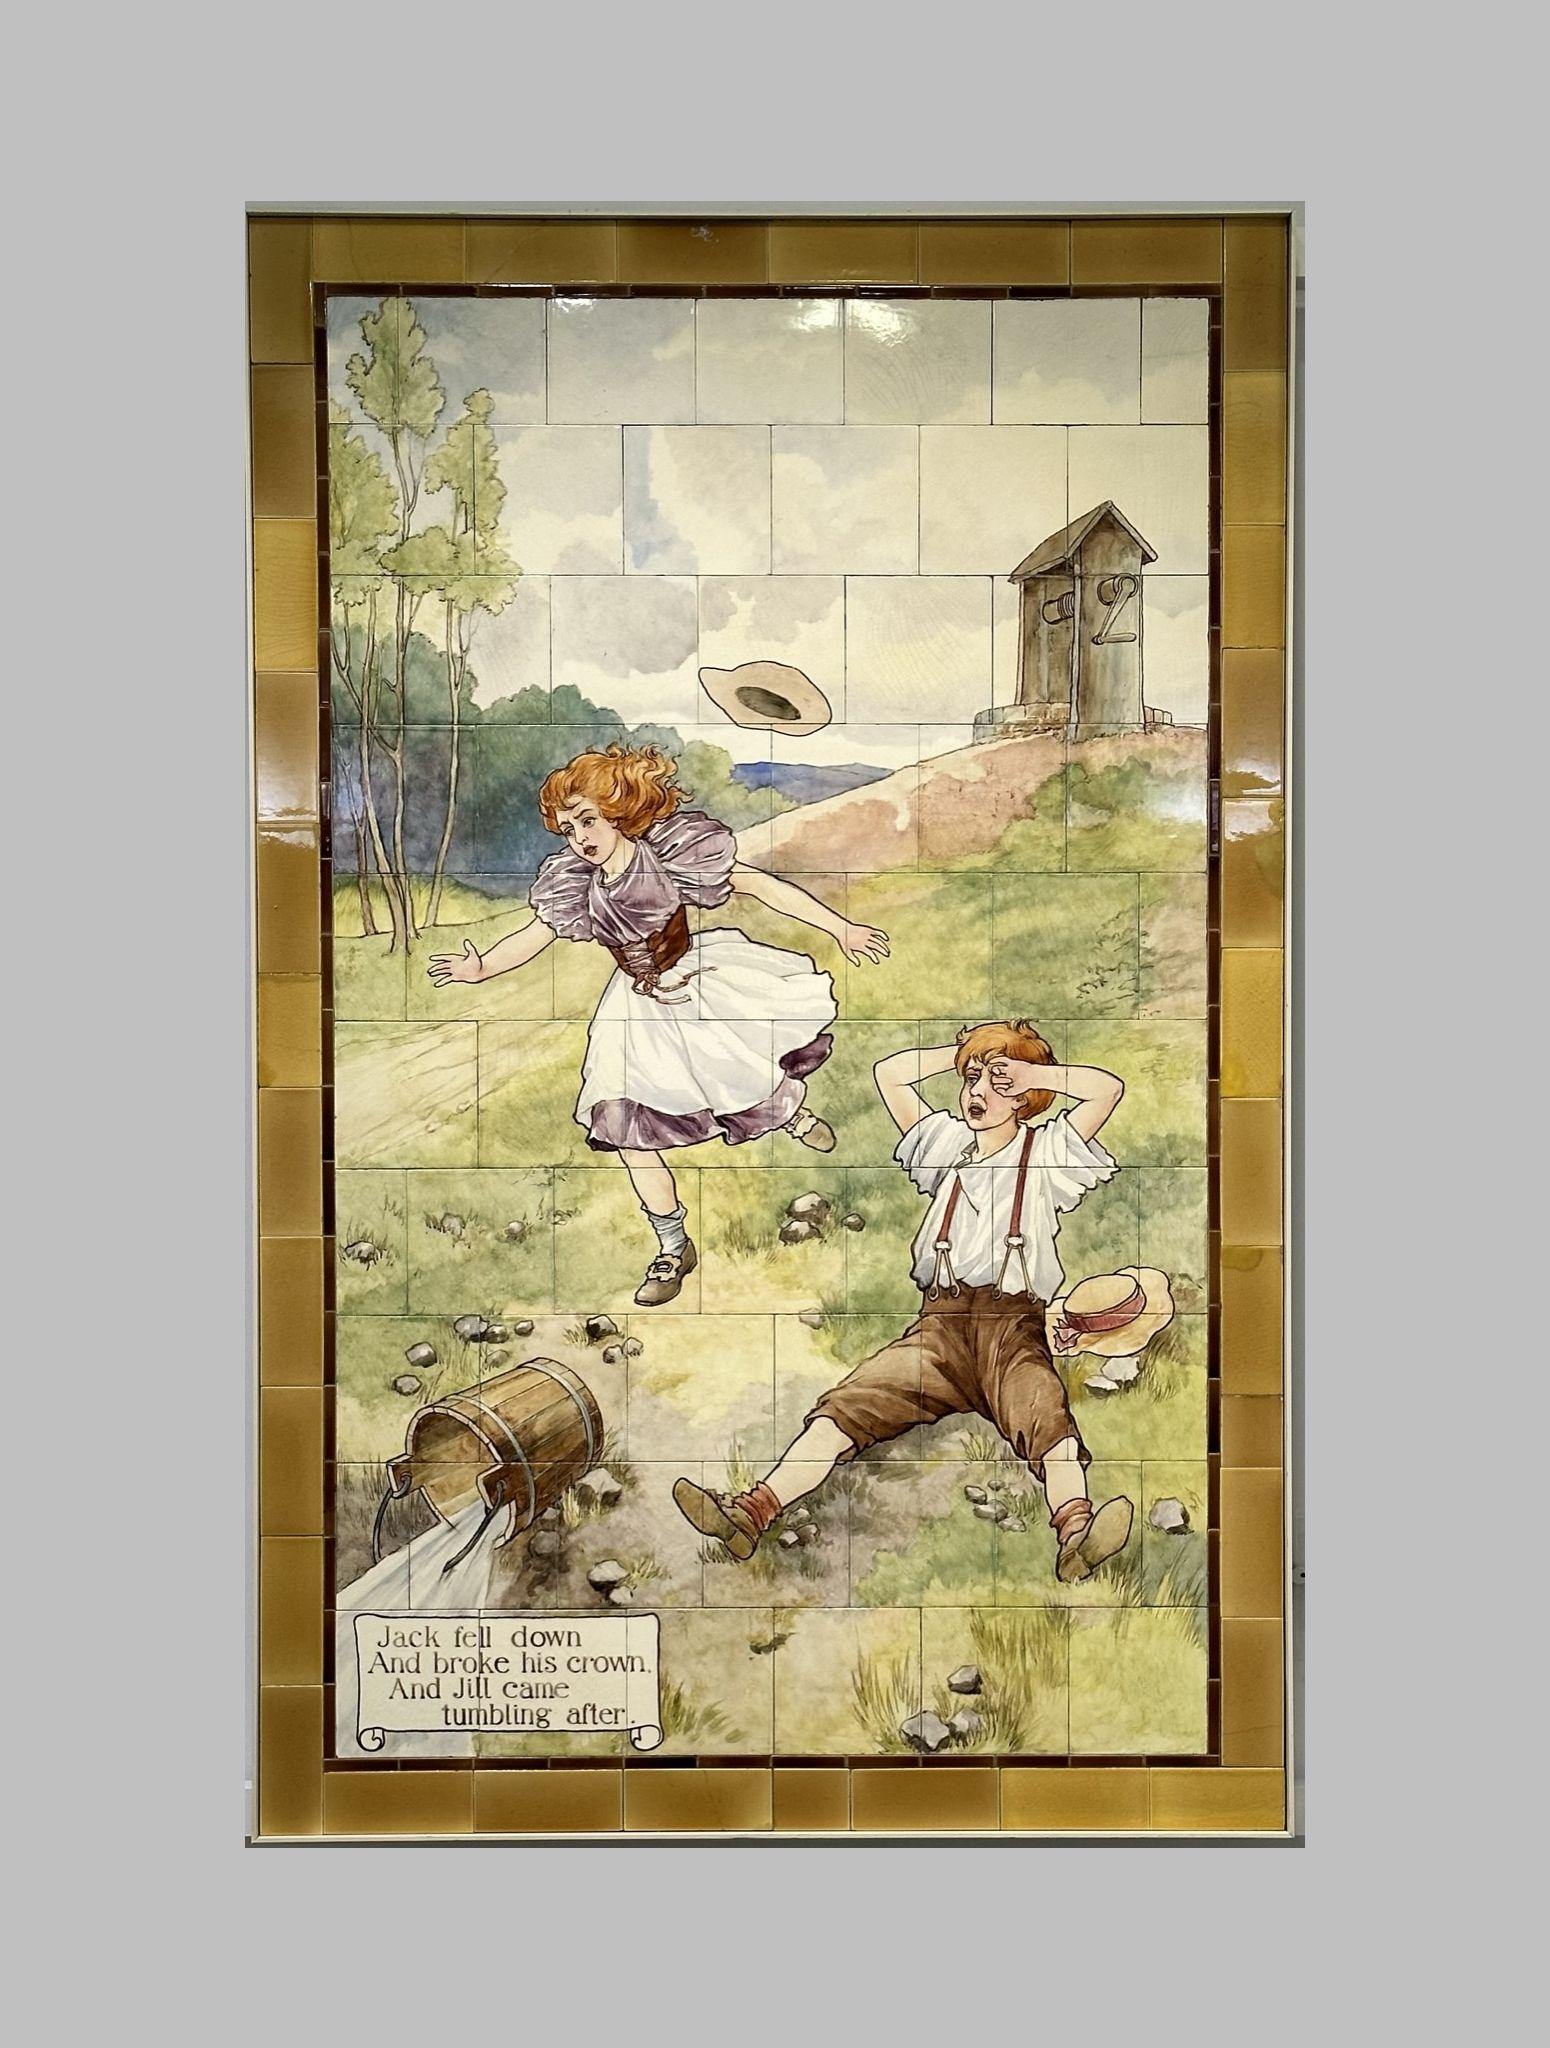 Jack And Jill scene painted on Doulton tiles (commissioned around 1900) from the Evelina Children's Hospital displayed in the long corridor of at St Thomas' hospital.